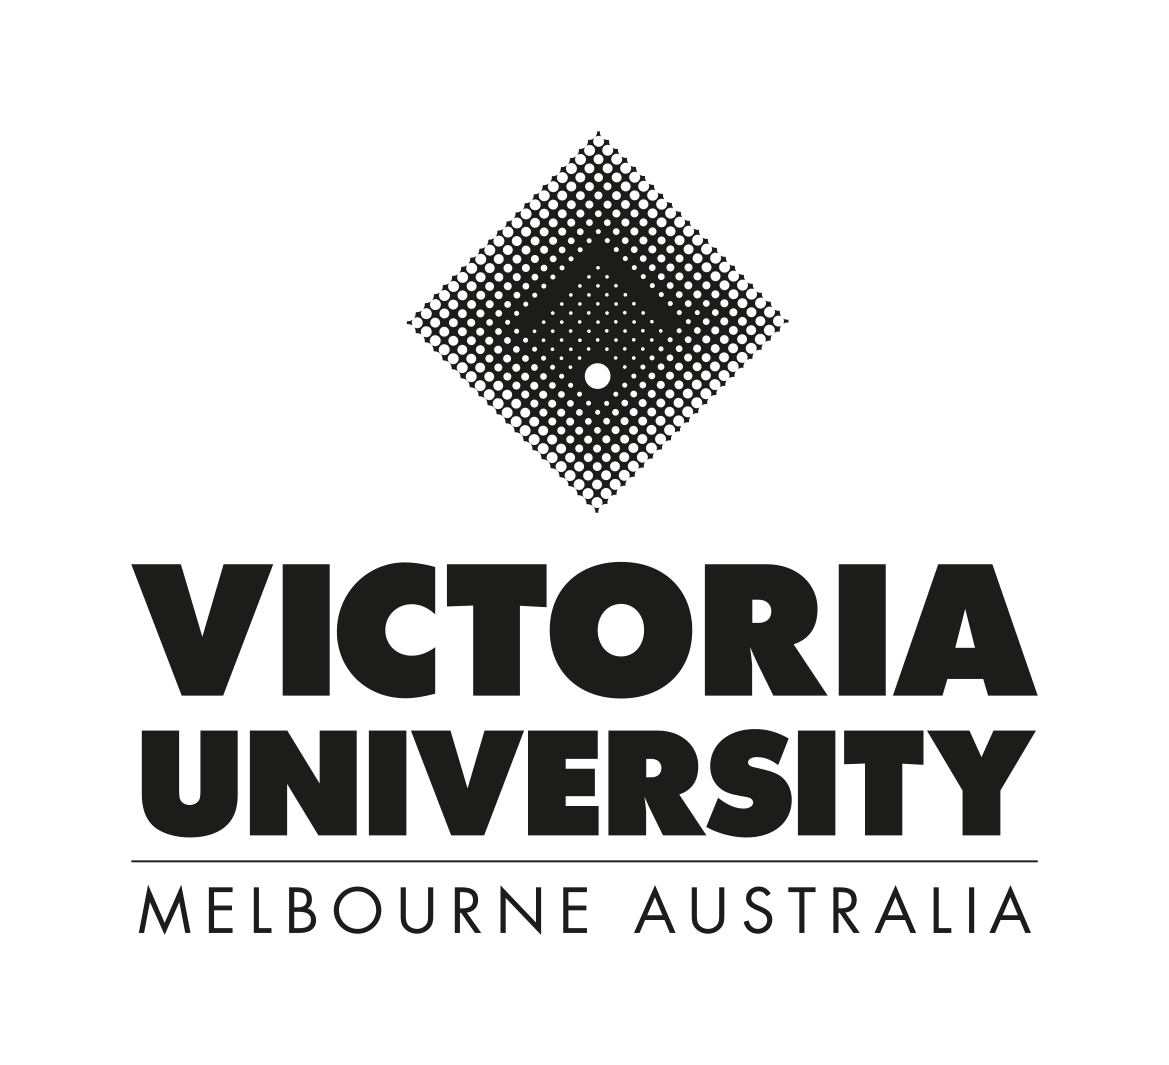 Victoria University Sustainable Packaging Research Group